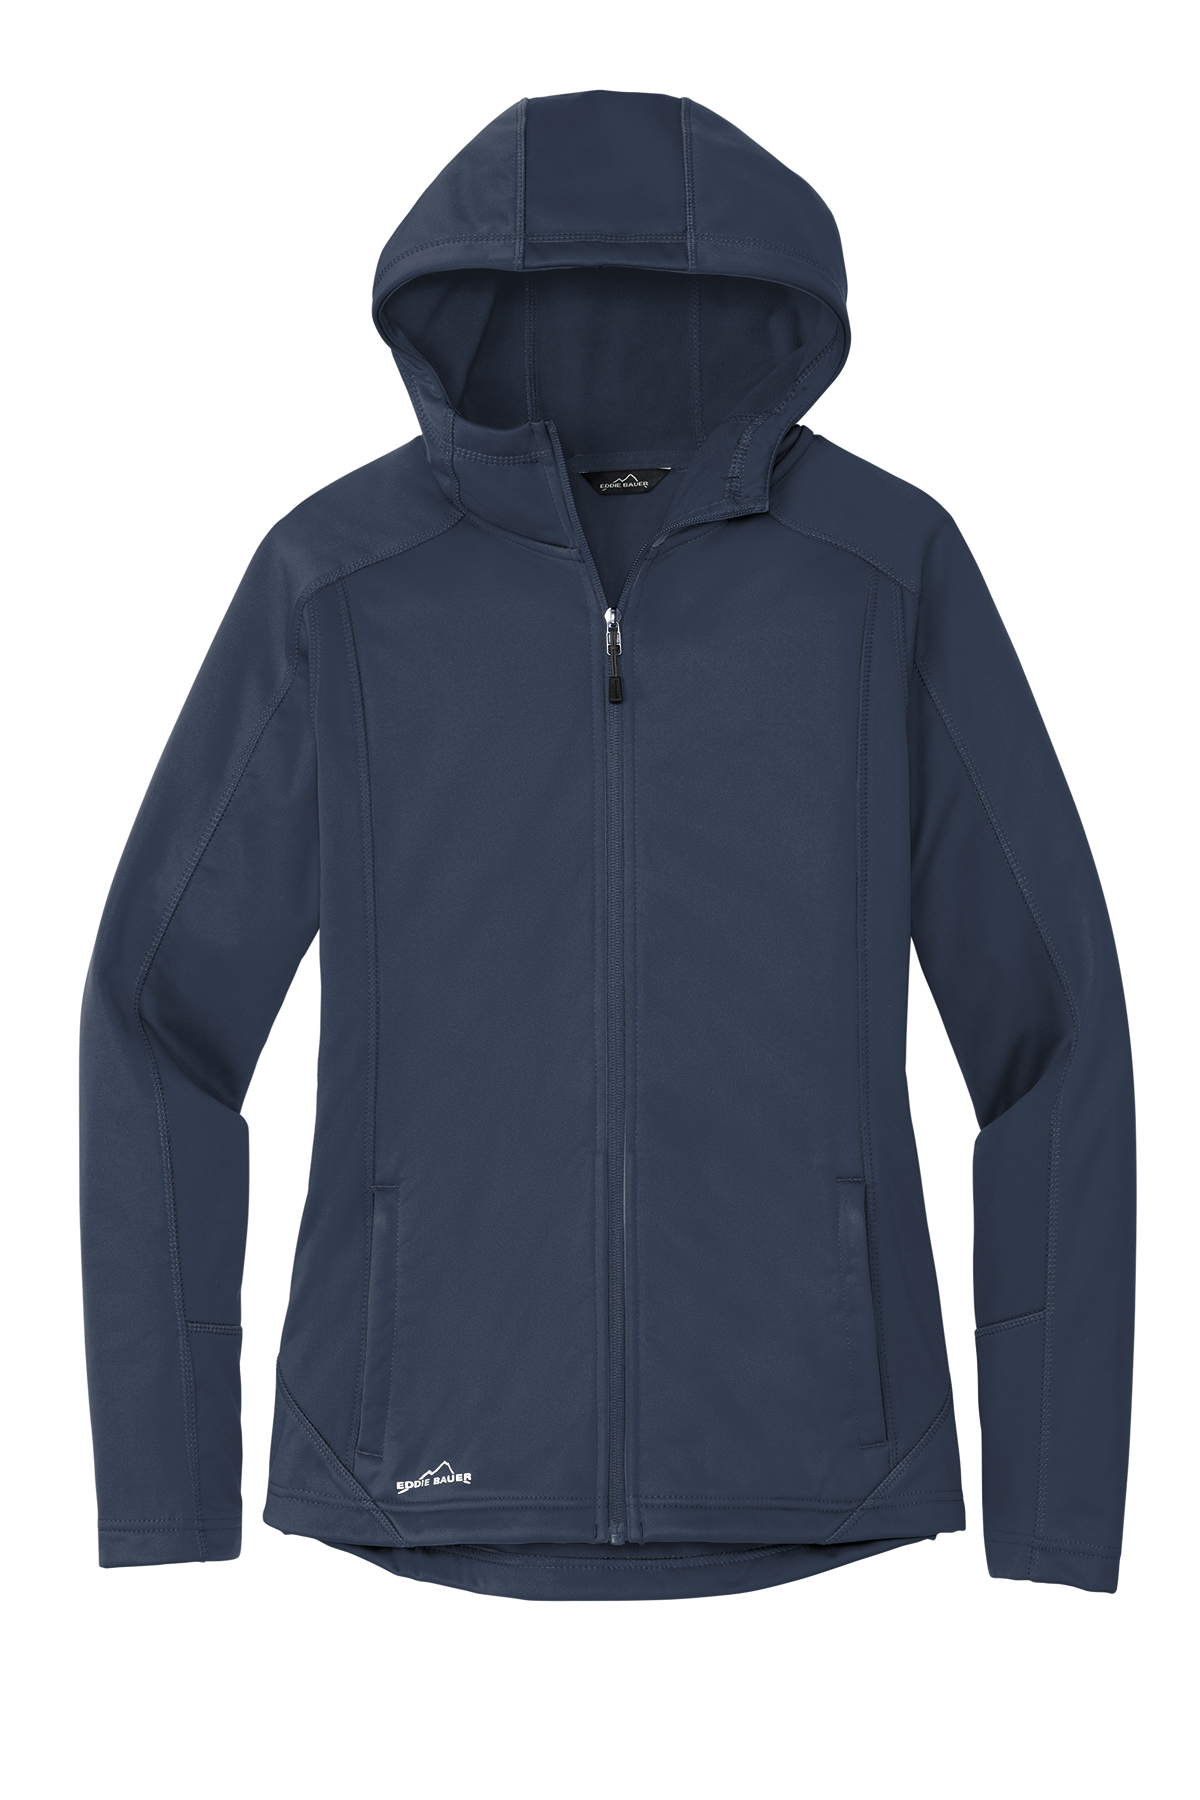 Company Bauer Eddie Product Ladies | Casuals Shell Jacket | Trail Soft